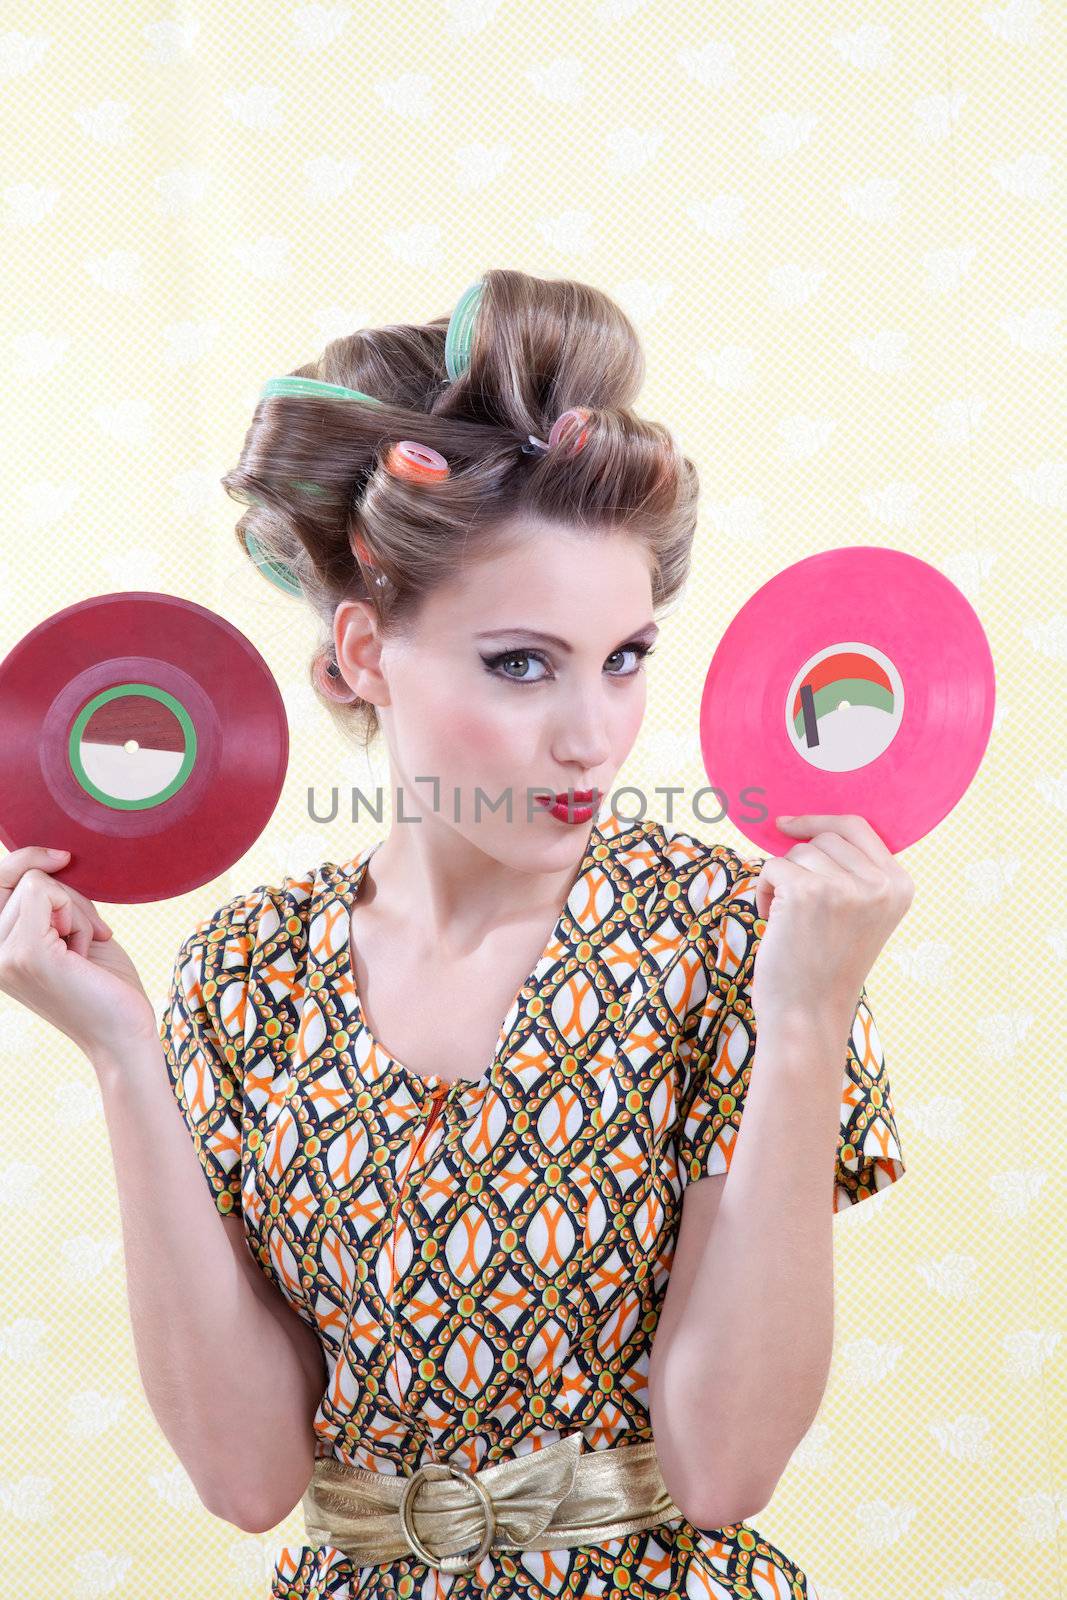 Woman Holding Vinyl Record by leaf